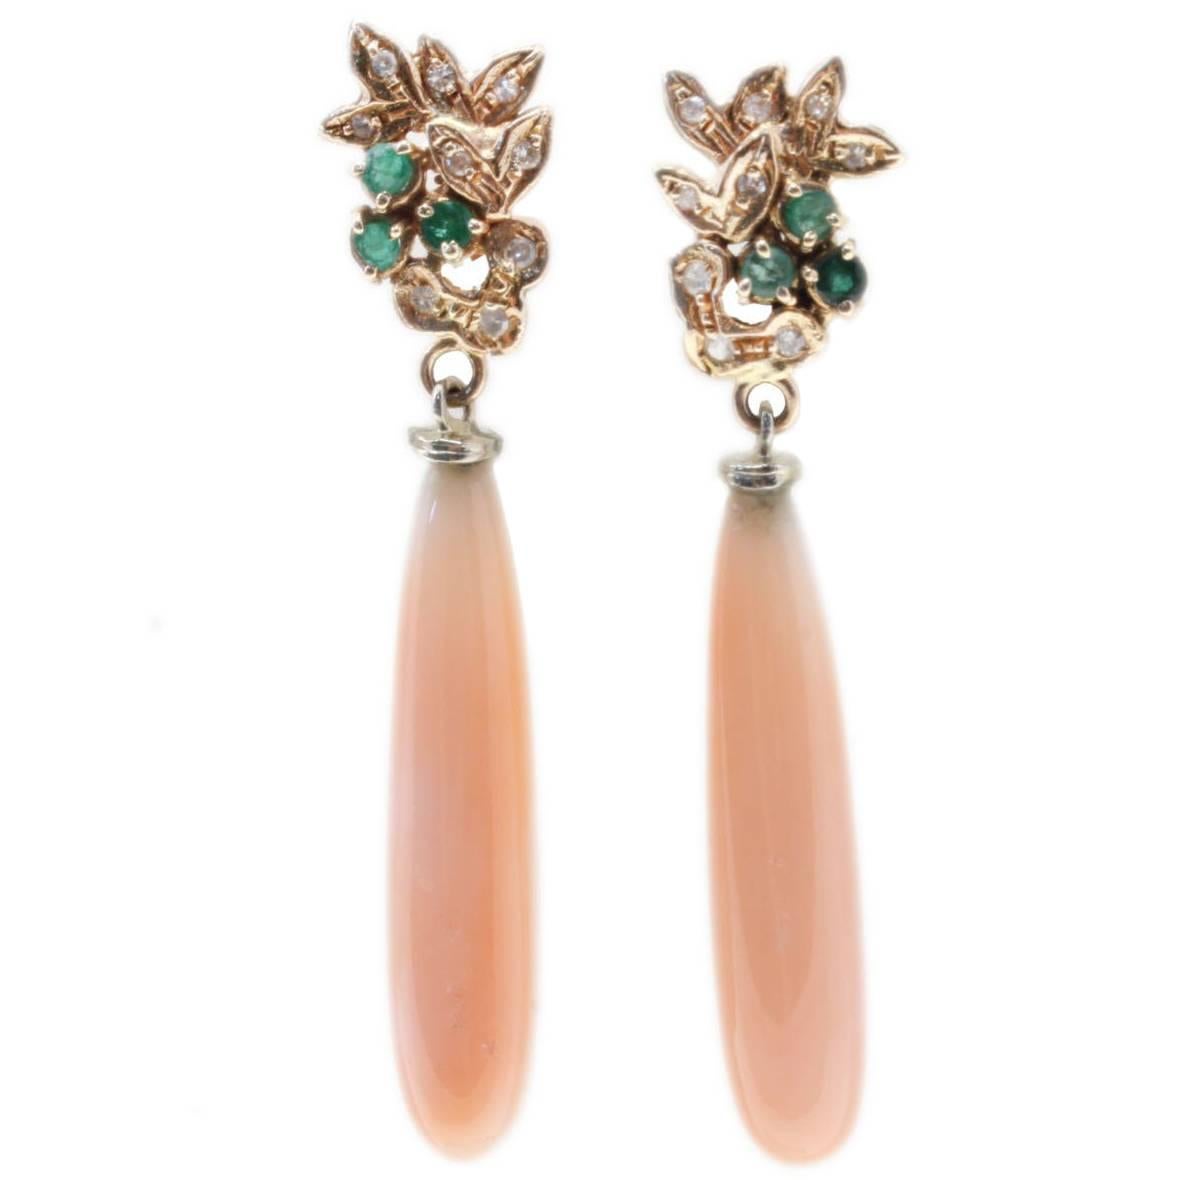 Luise Diamond Emerald and Coral Drop Earrings